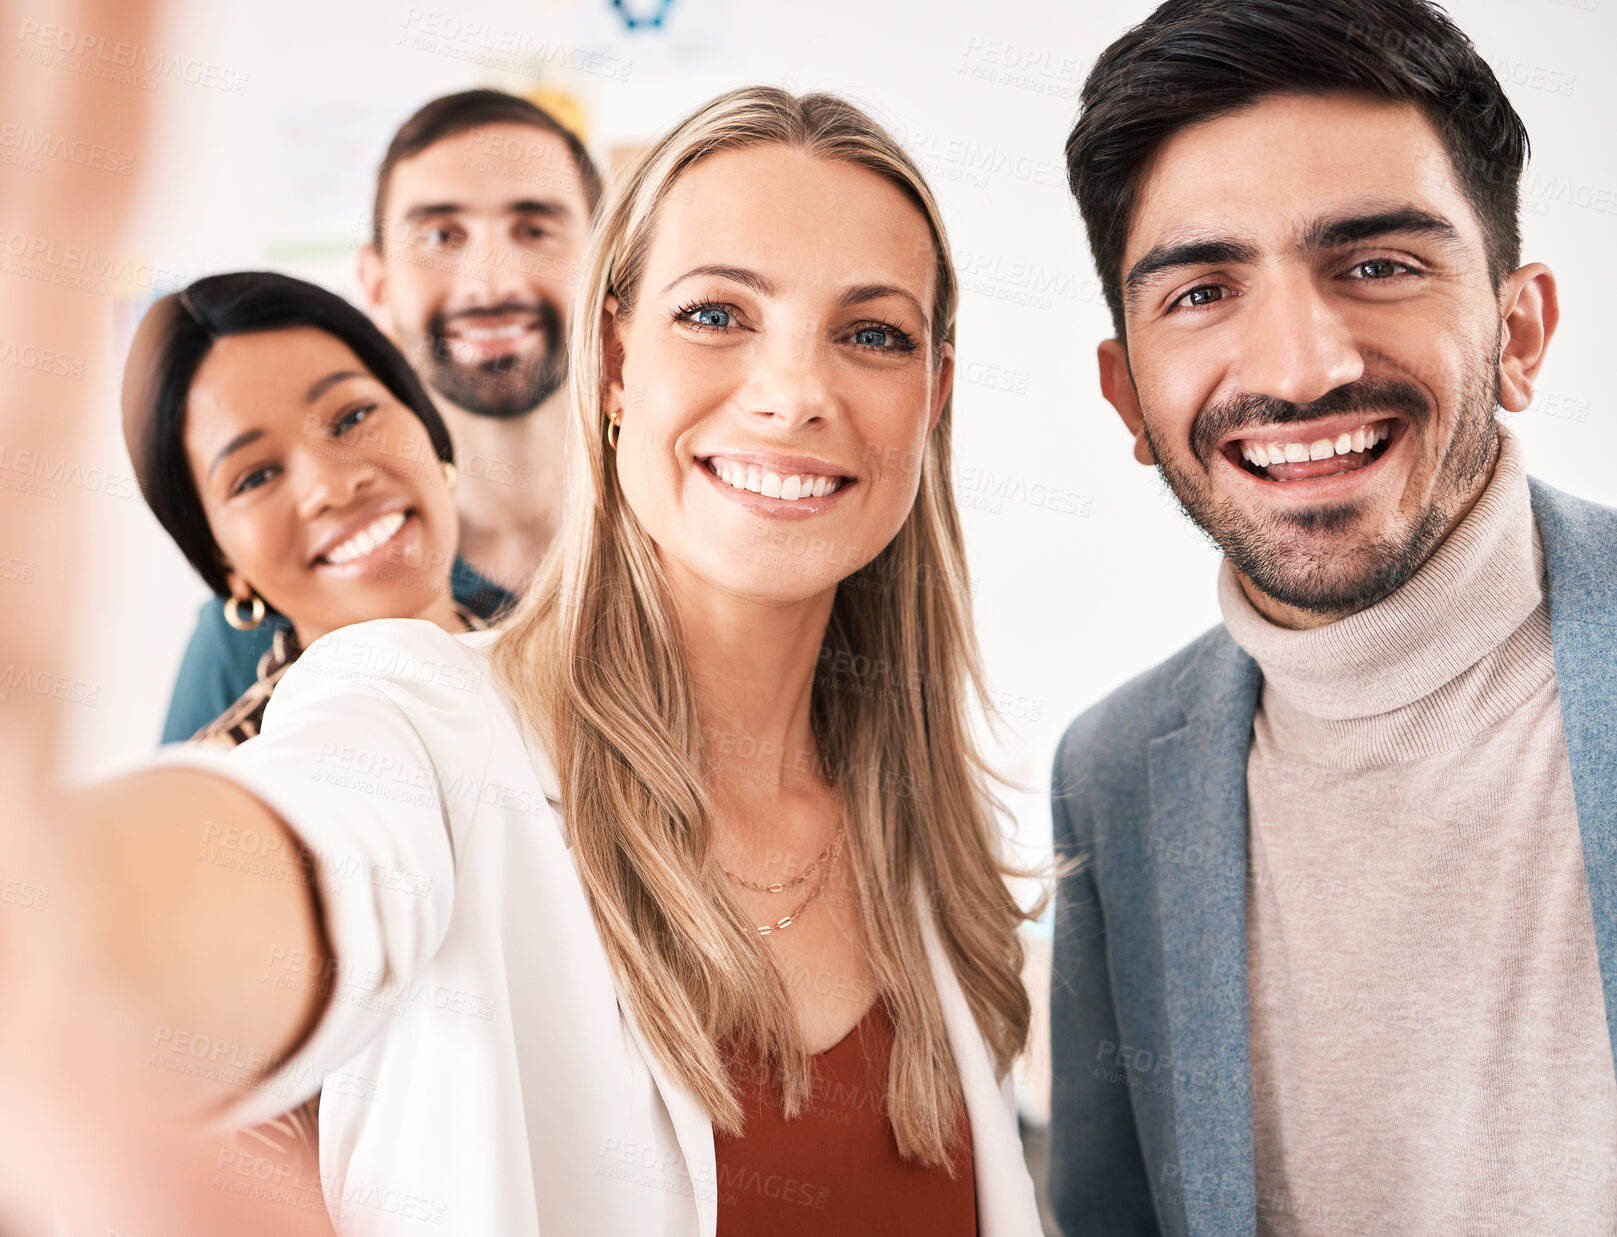 Buy stock photo Happy, motivation and selfie with office friends together for seminar or team building workshop. Business people with friendly, joyful and positive relationship for healthy workforce culture.